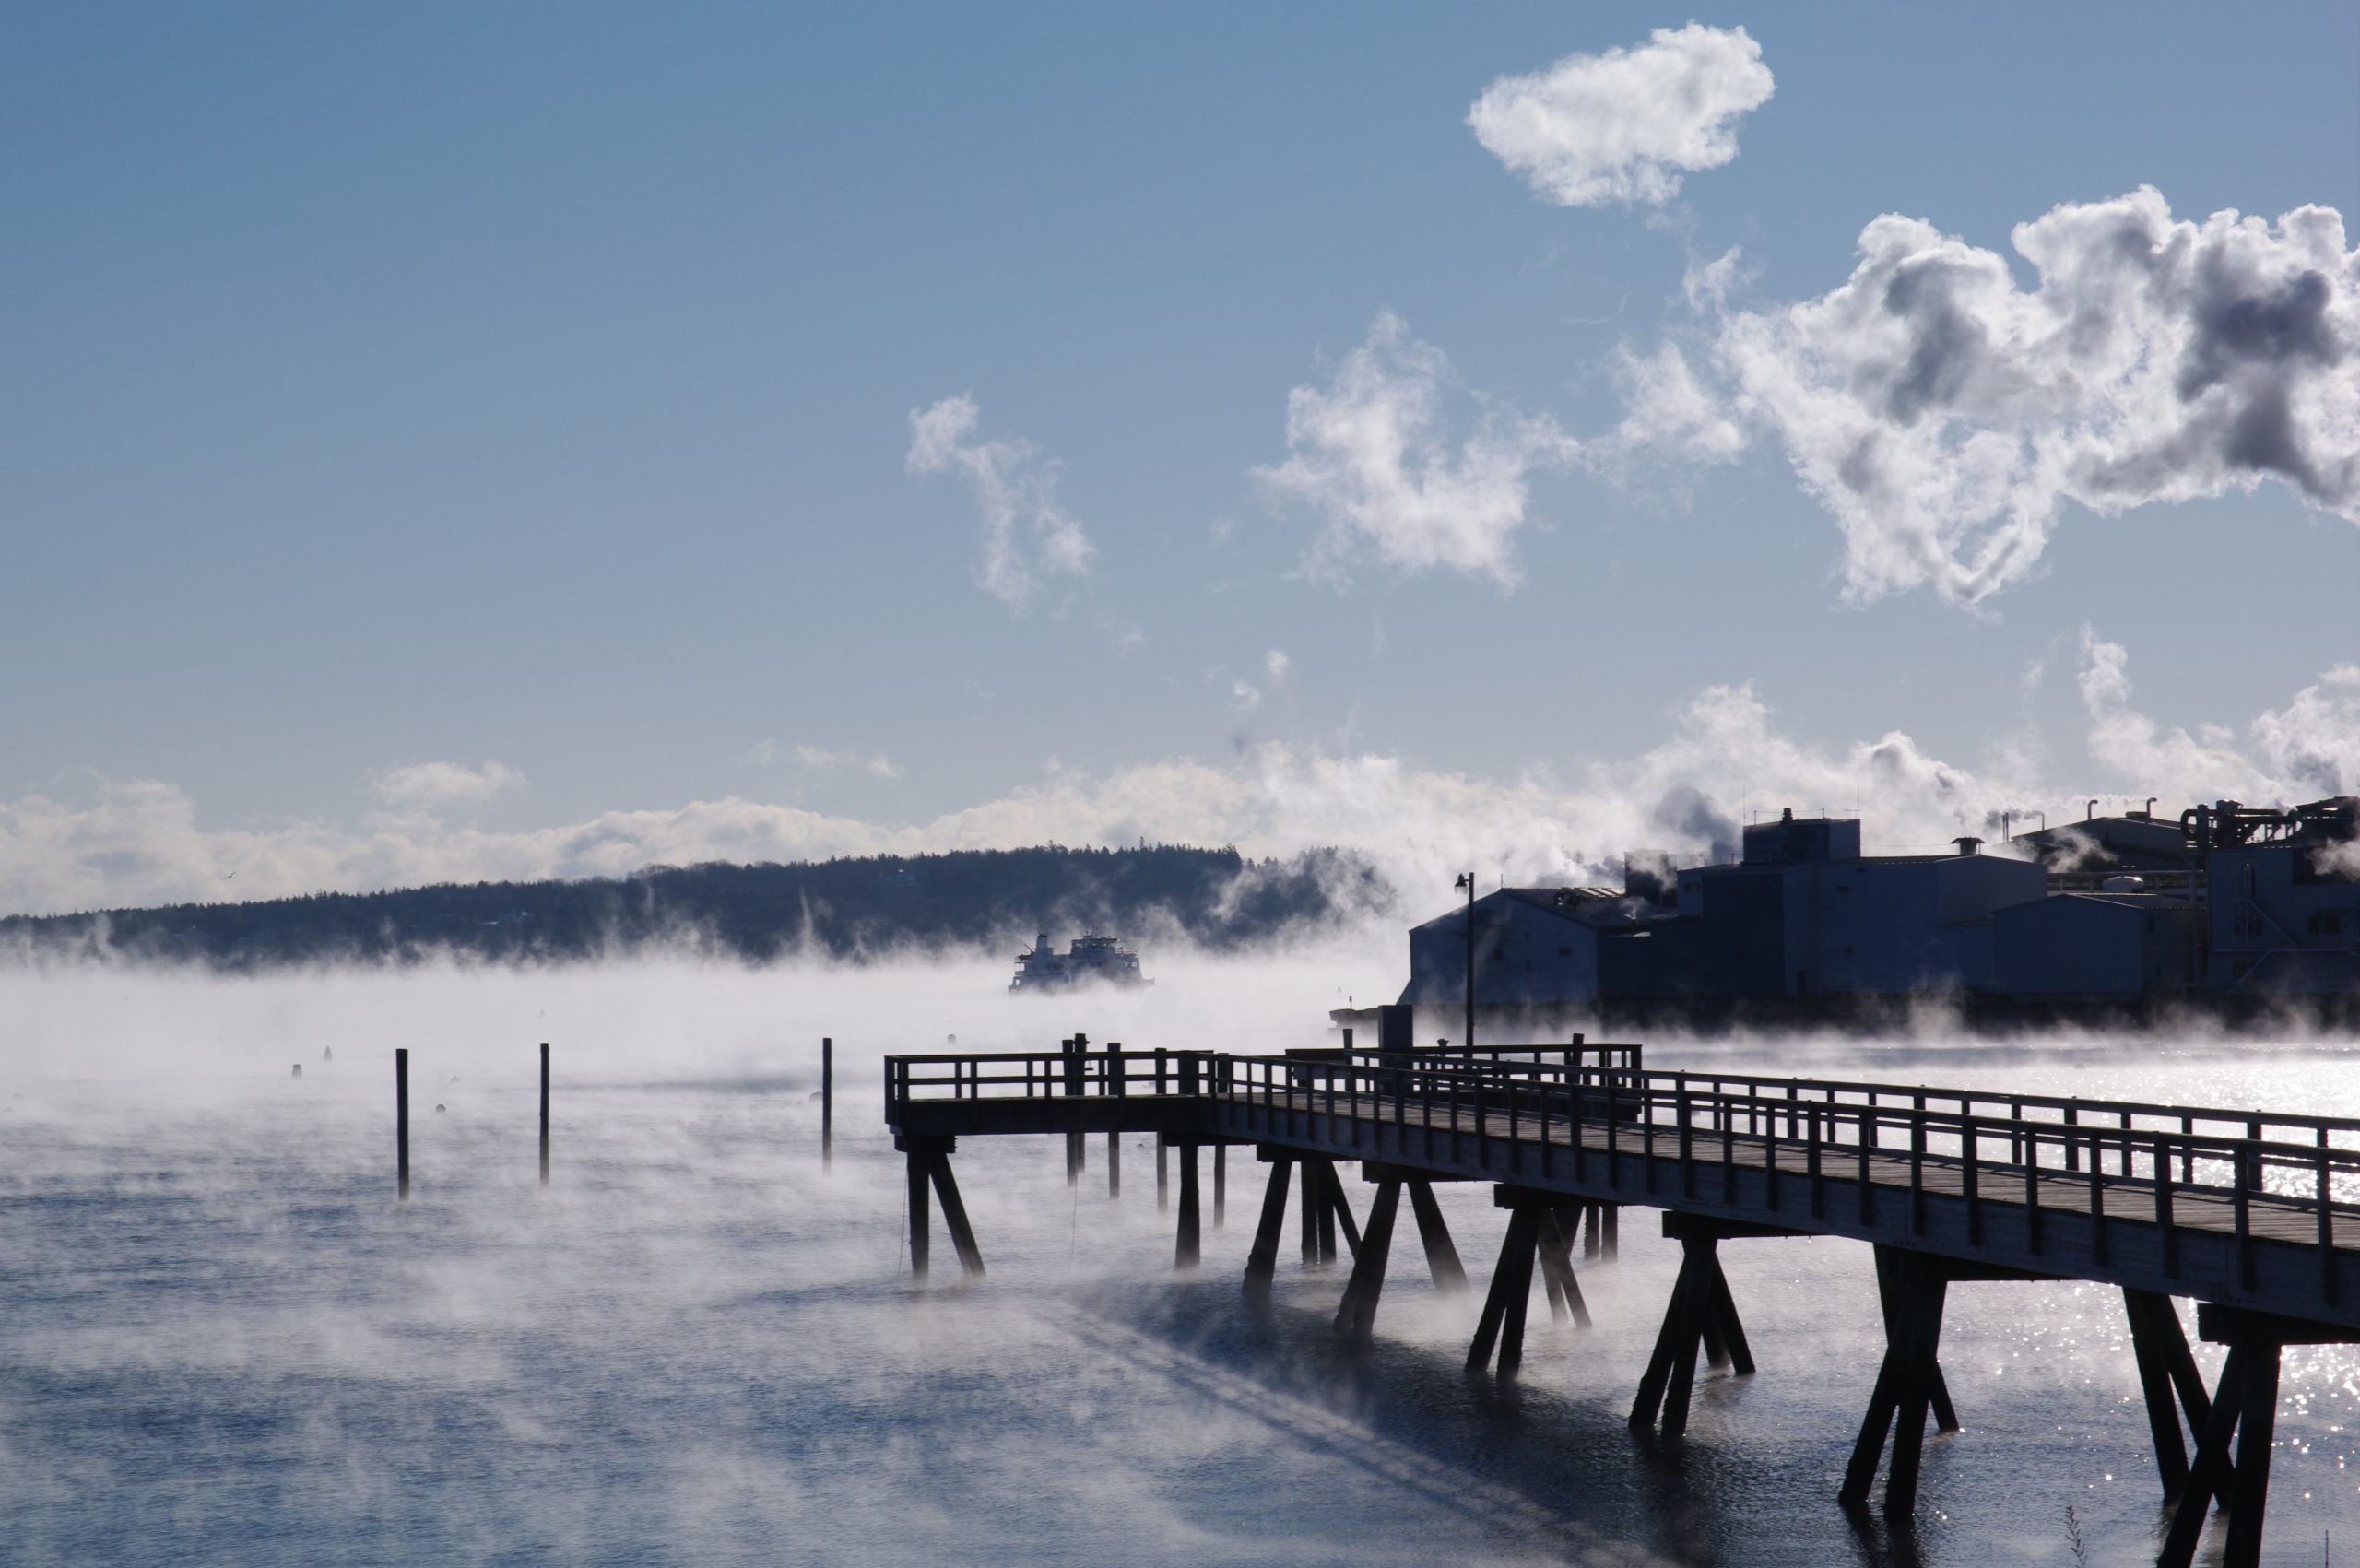 A photograph of a long wooden dock on a frozen lake. On the far right, a large factory is depicted. The lake is covered in frost smoke and the sky is a light blue with whisps of white clouds.